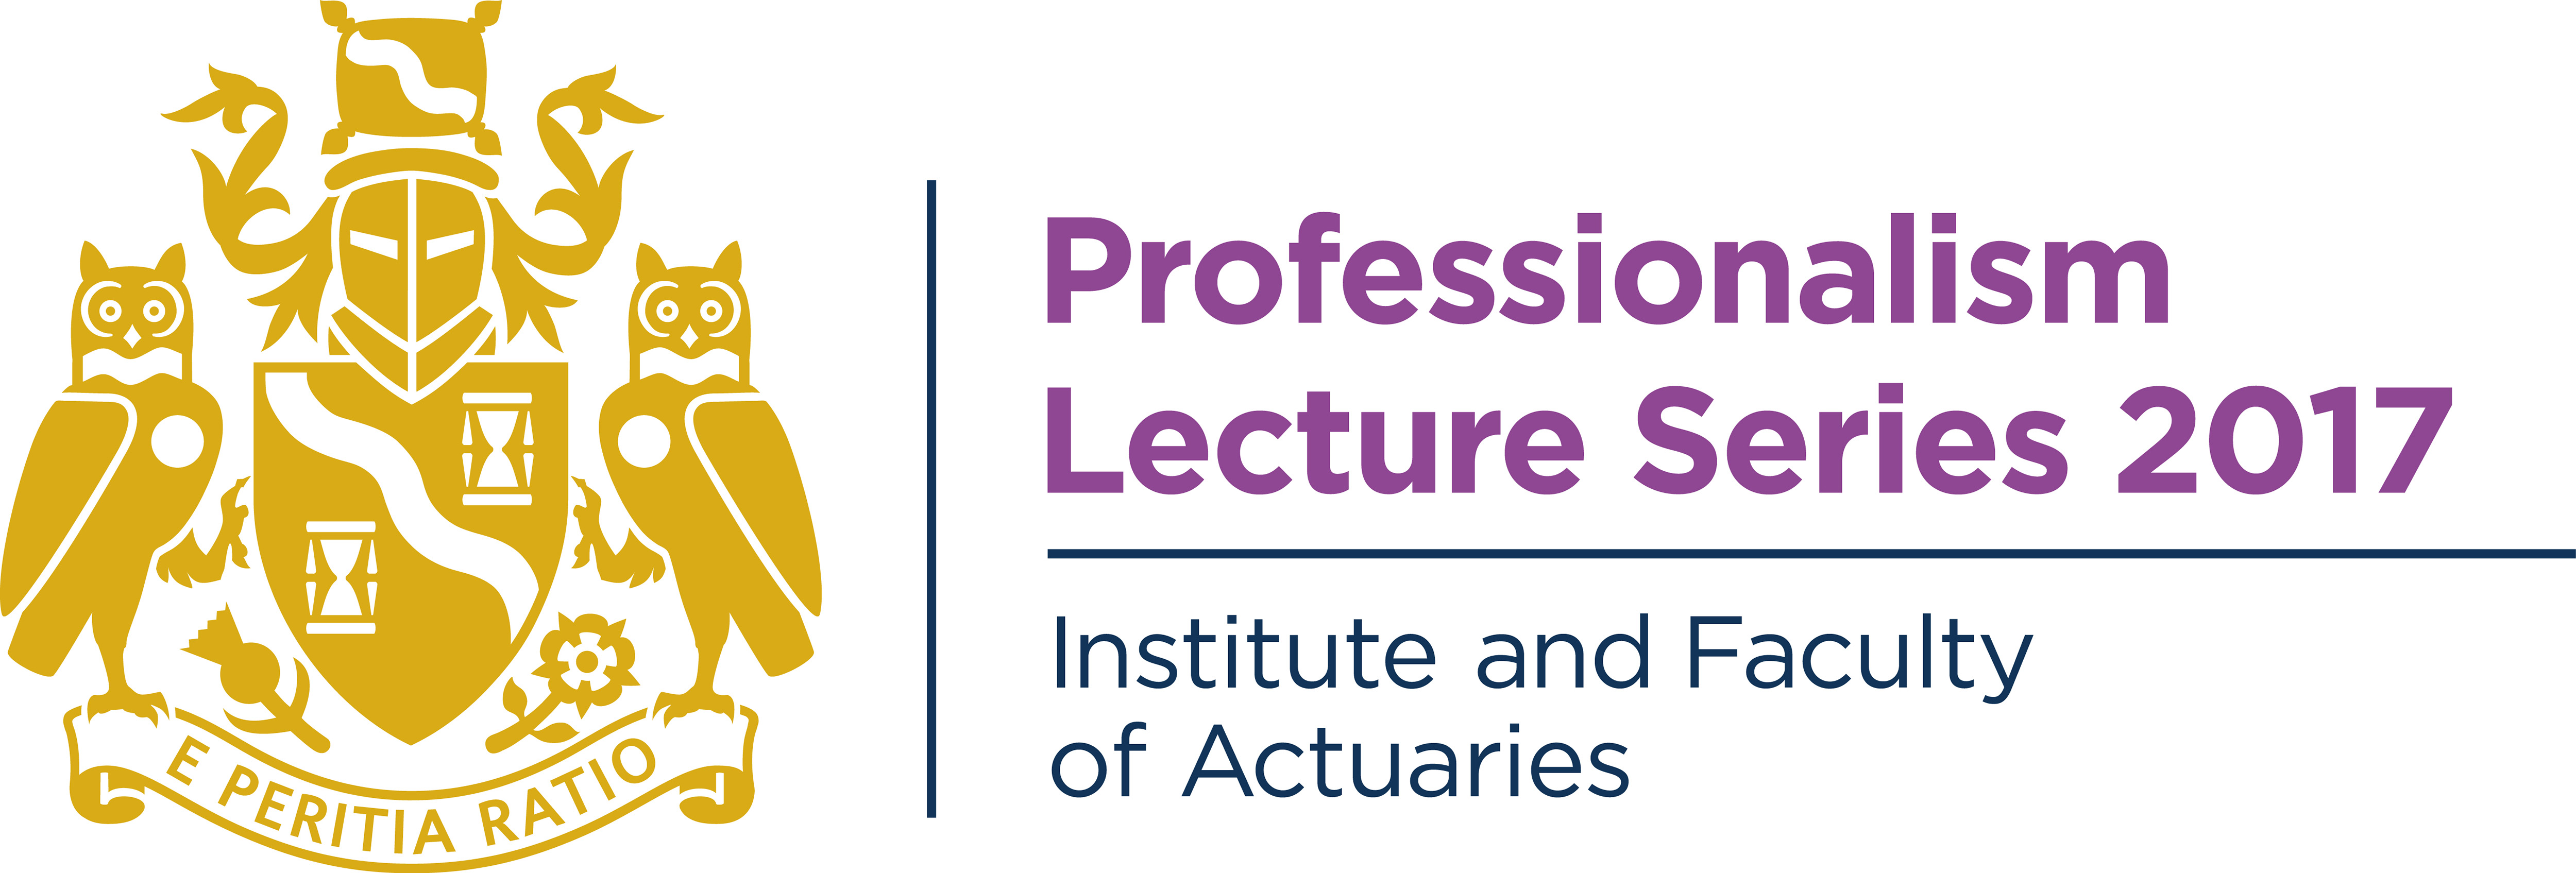 Professionalism Lecture Series 2017